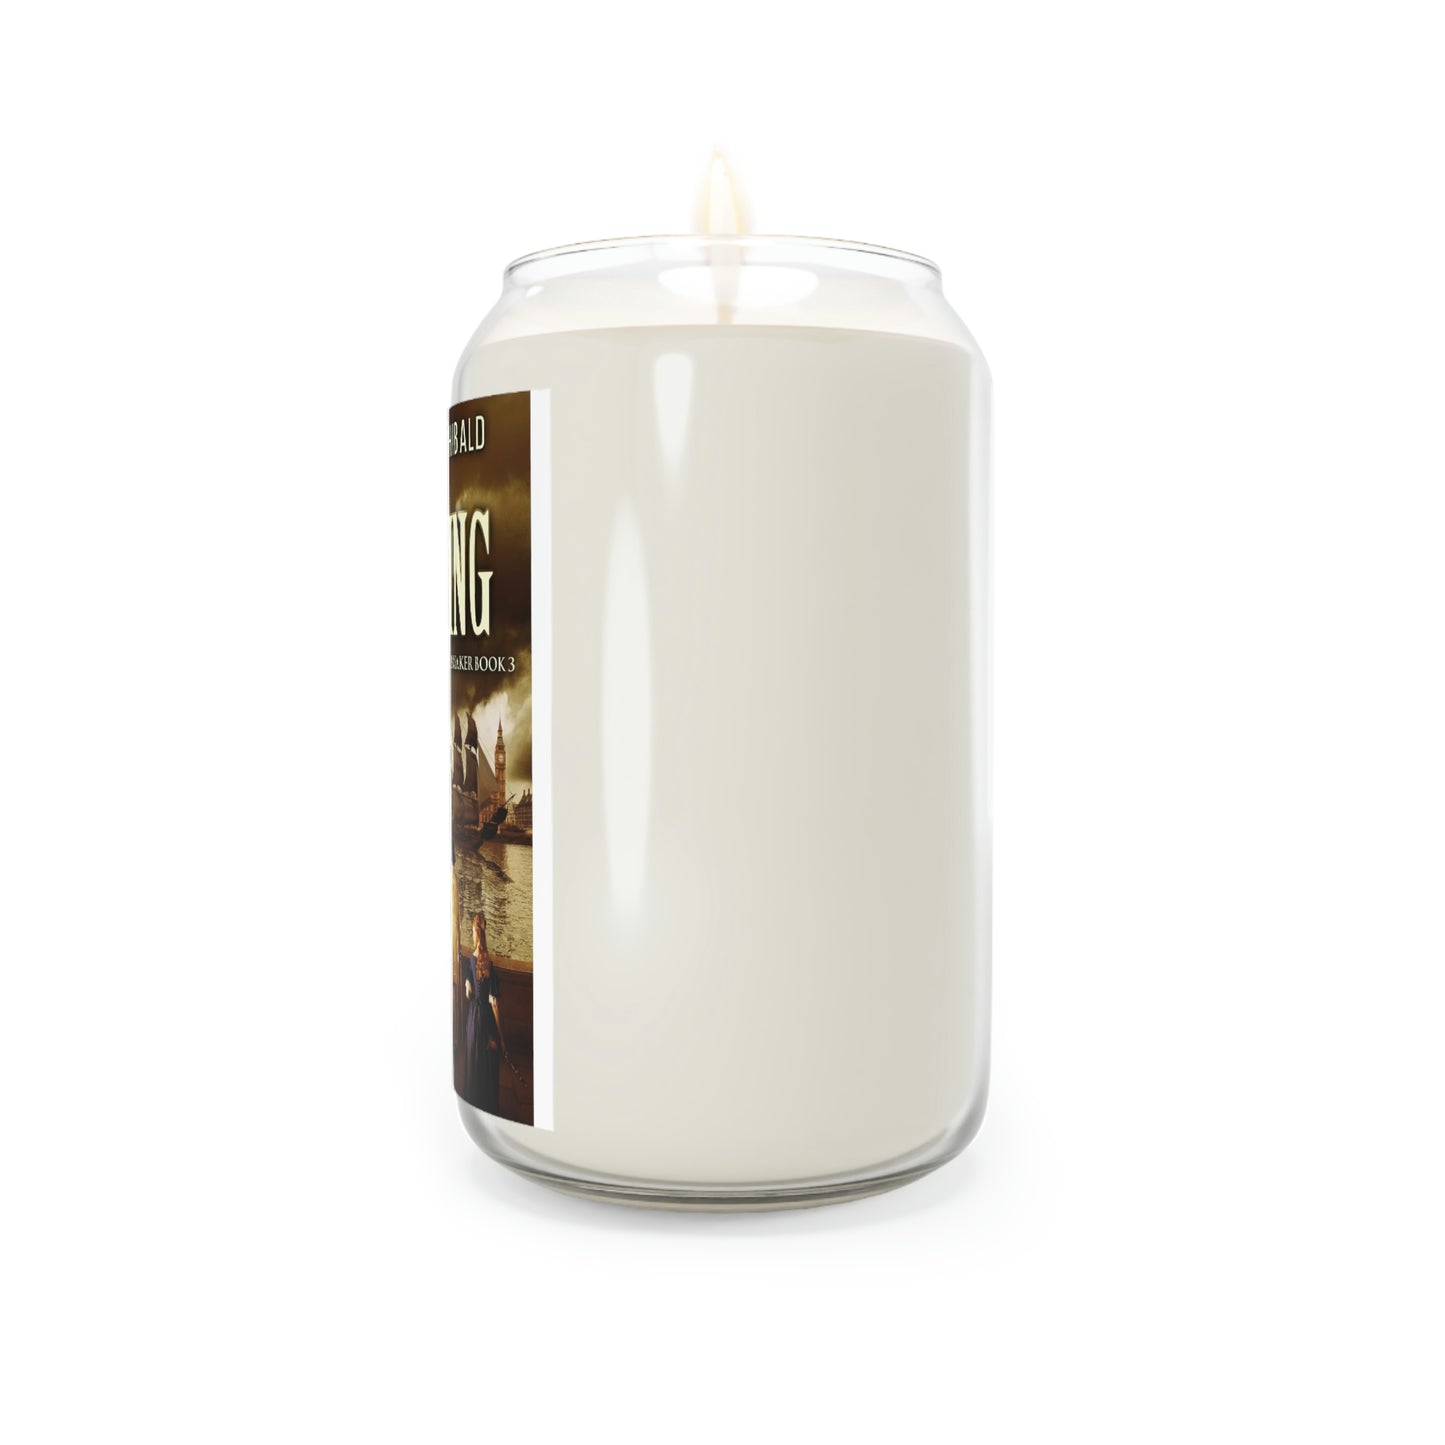 Reigning - Scented Candle